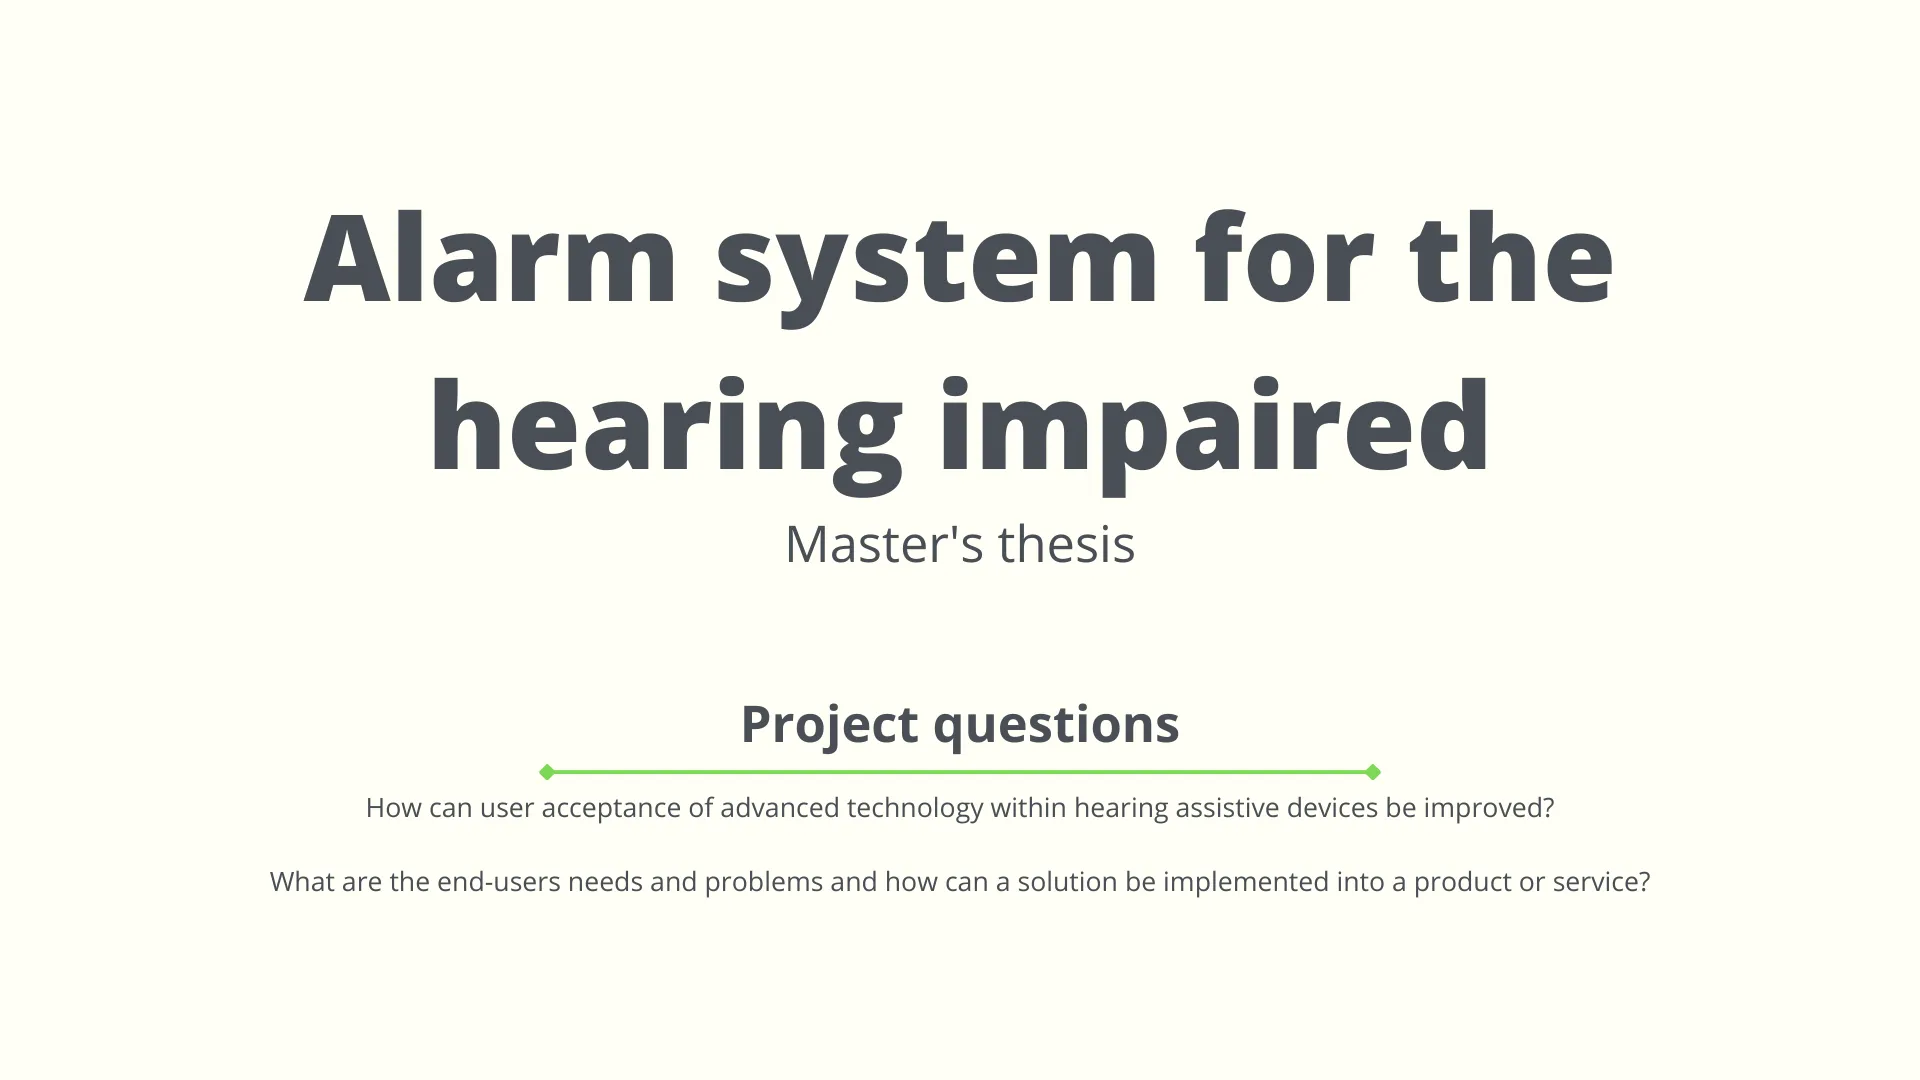 Alarm system for the hearing impaired